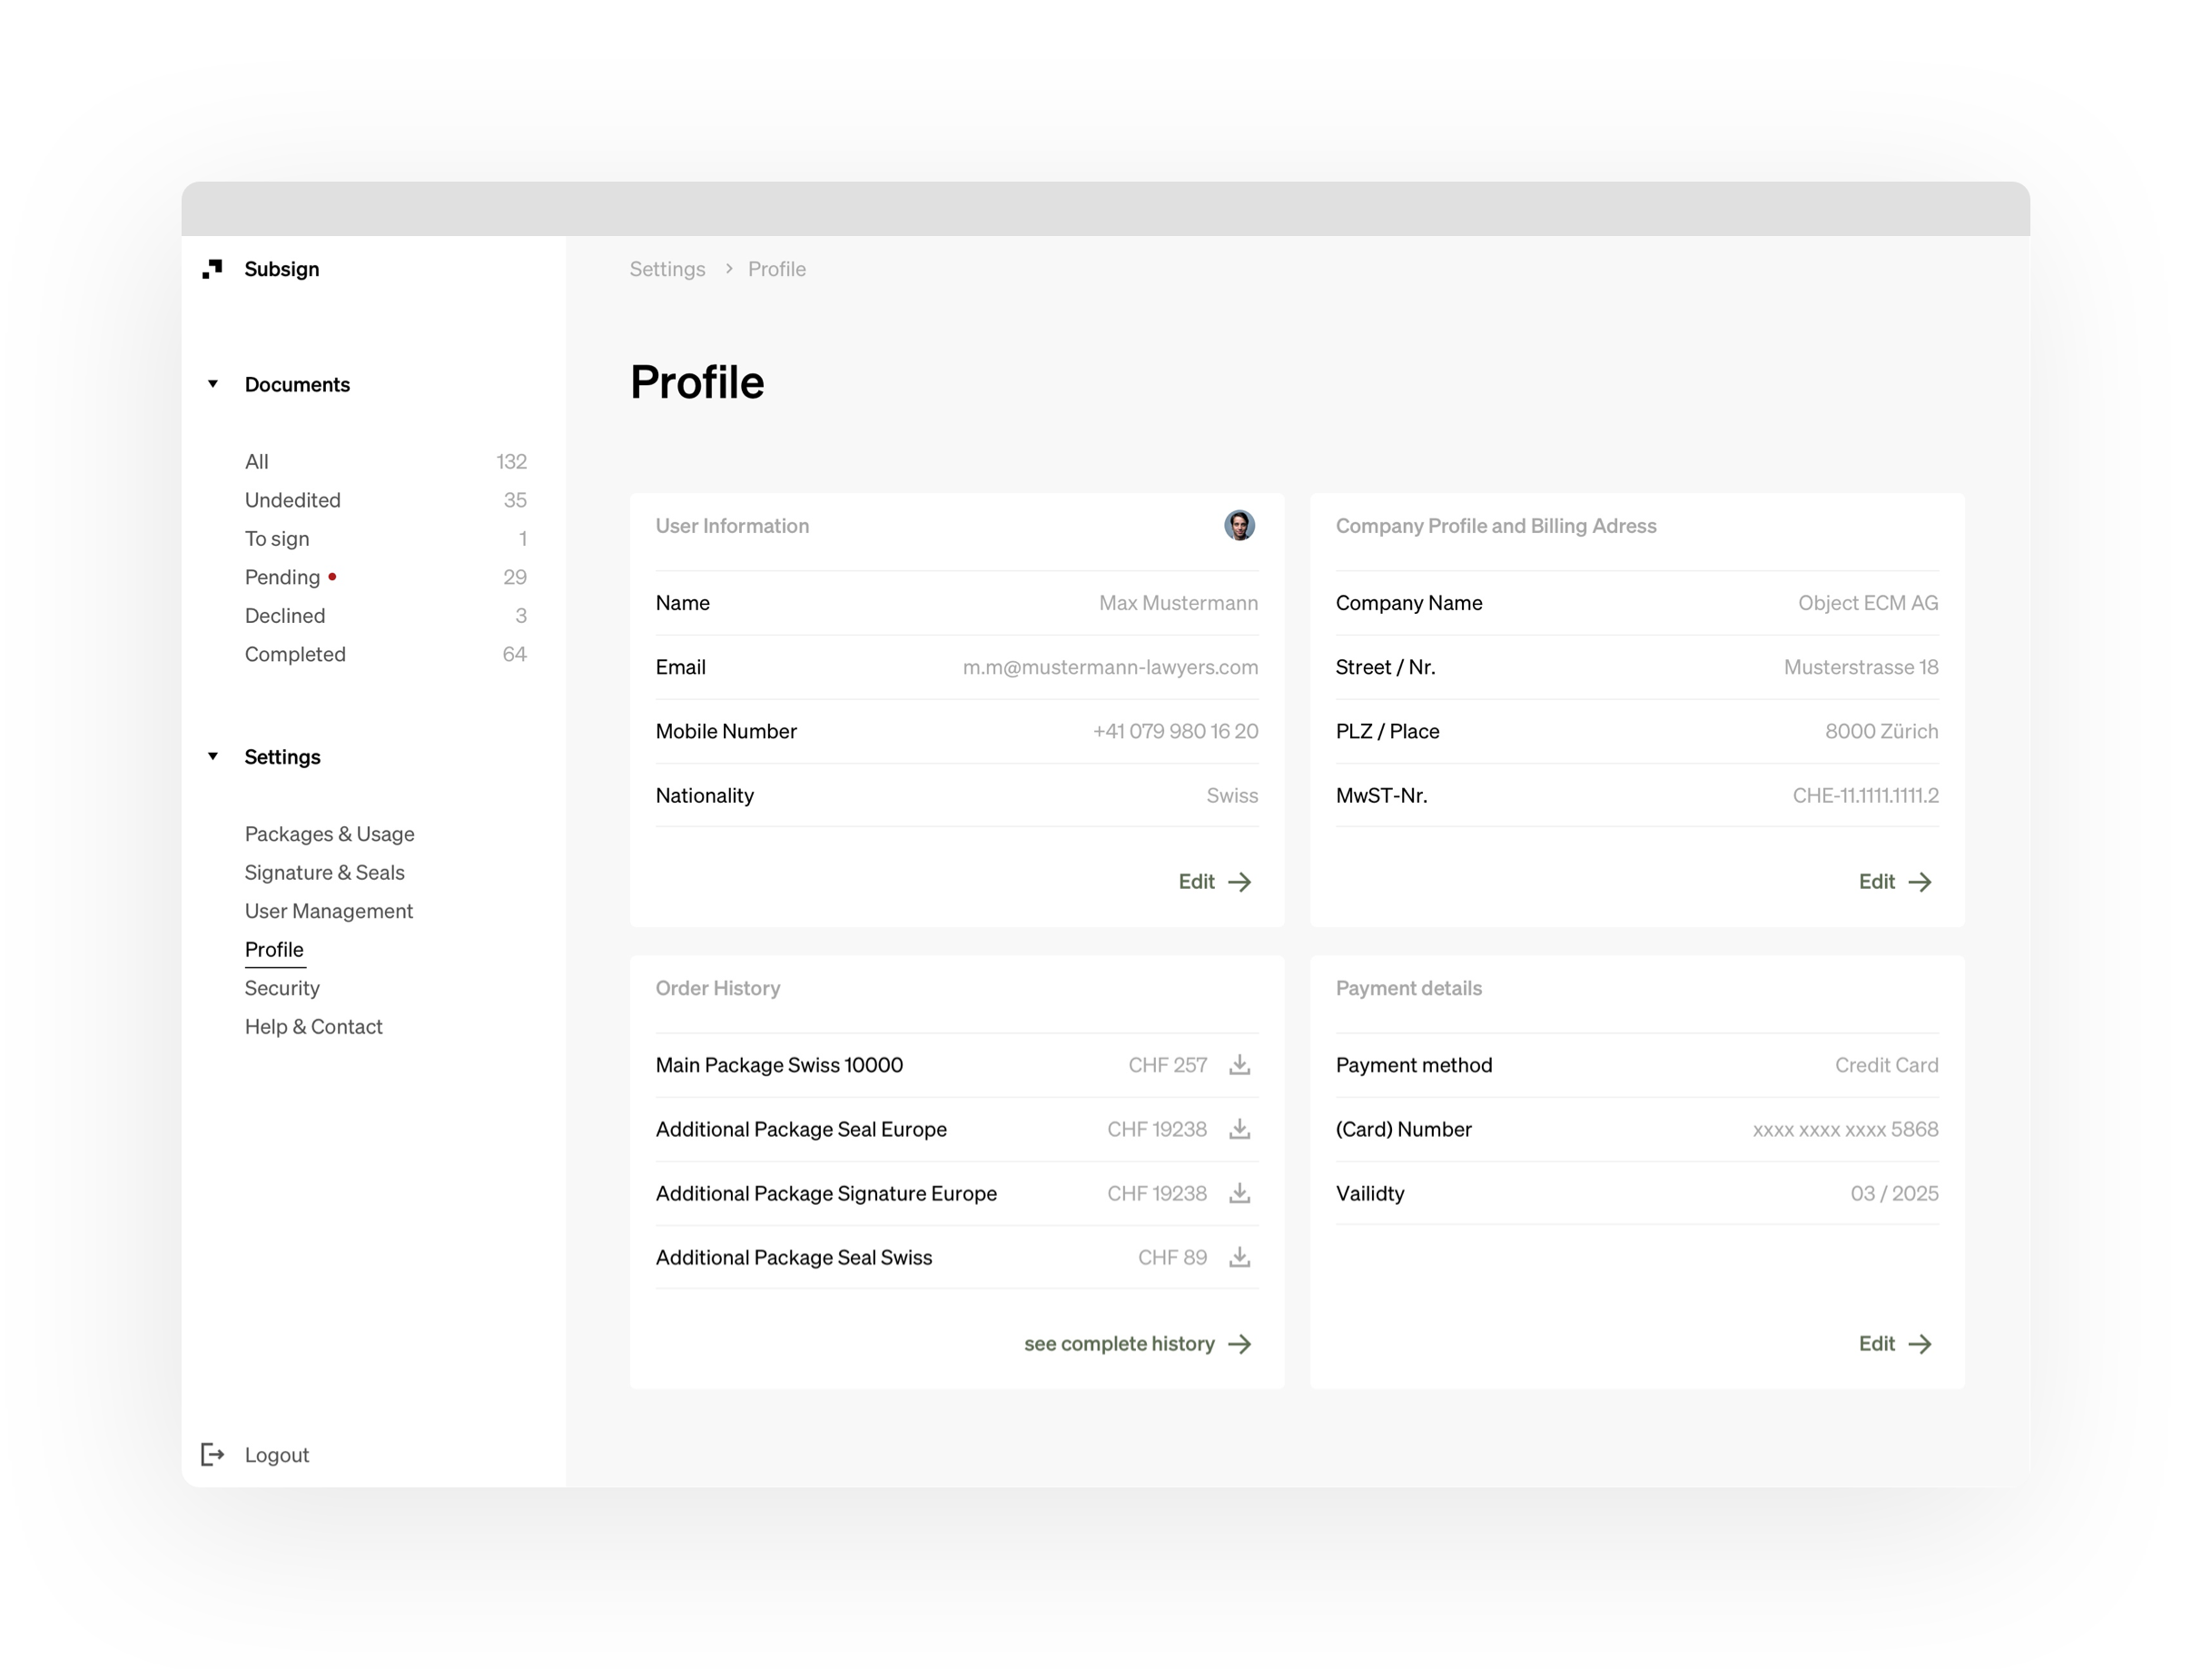 Subsign user profile page